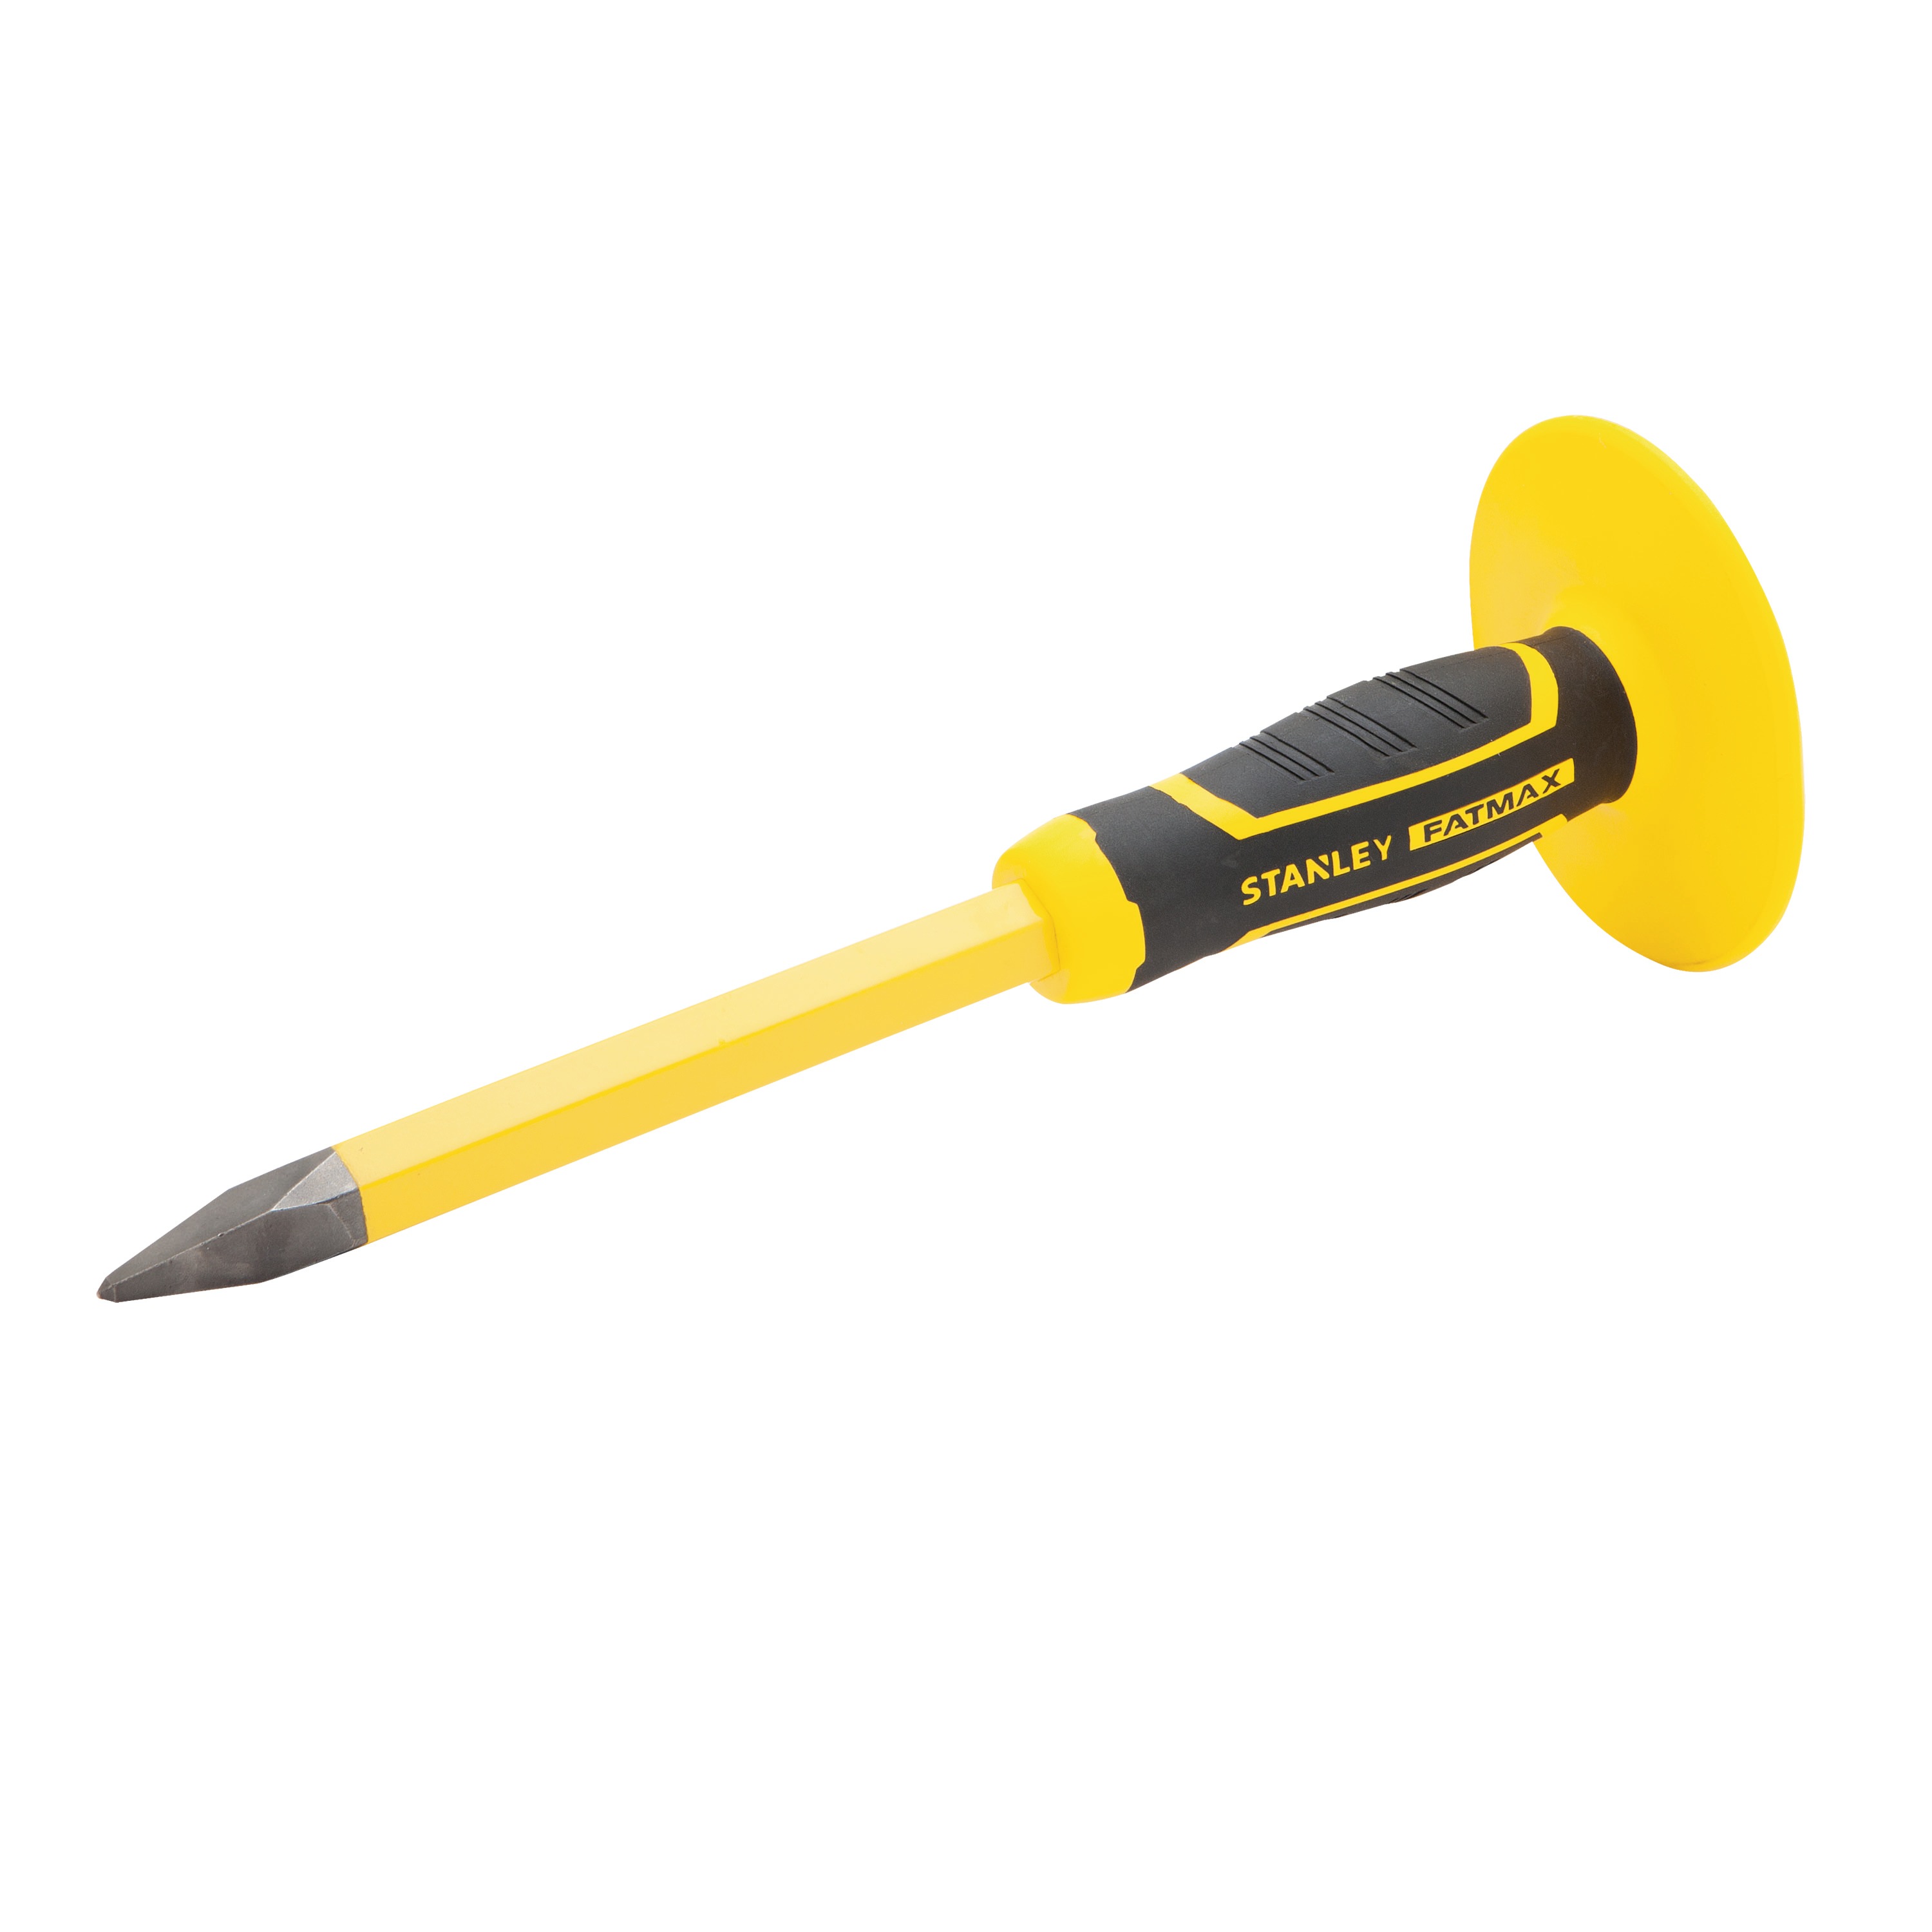 Stanley Tools - 58 in FATMAX Concrete Chisel with Guard - FMHT16578